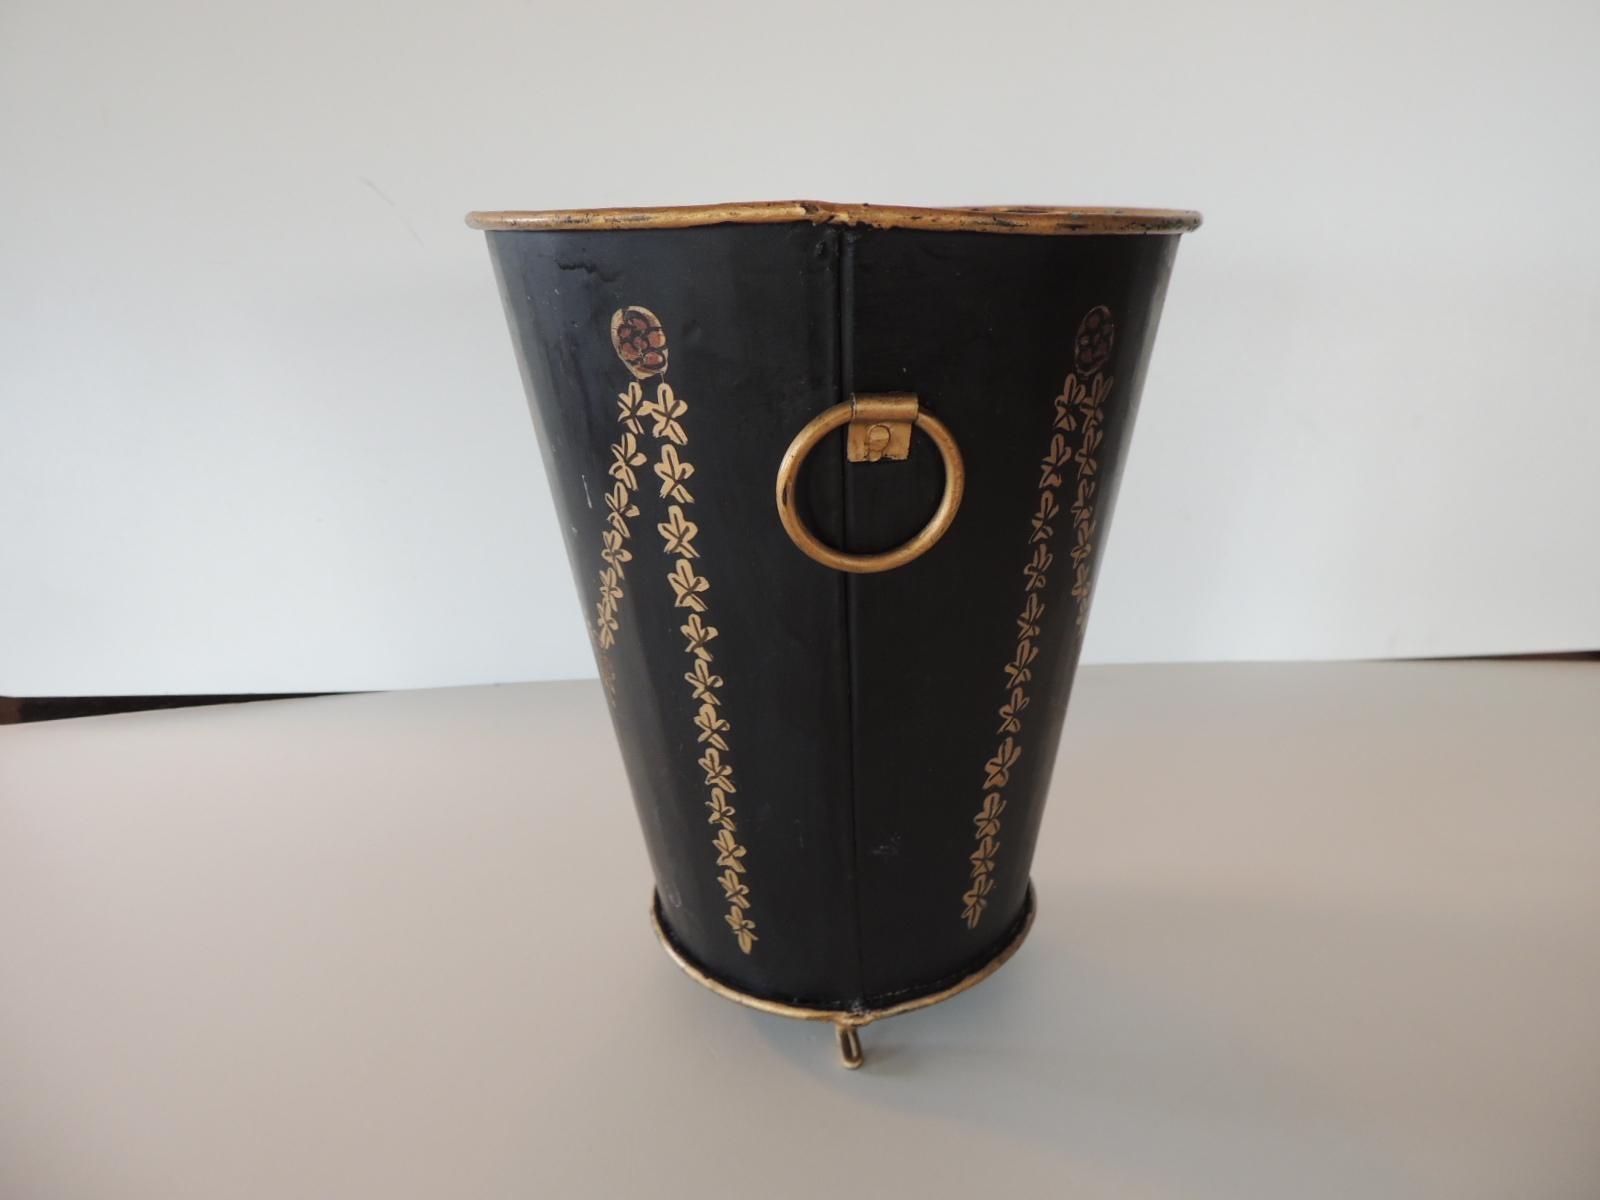 Tole black and gold catchpot depicting garlands and bows.
Small gold leaf feet.
Size: 7.5